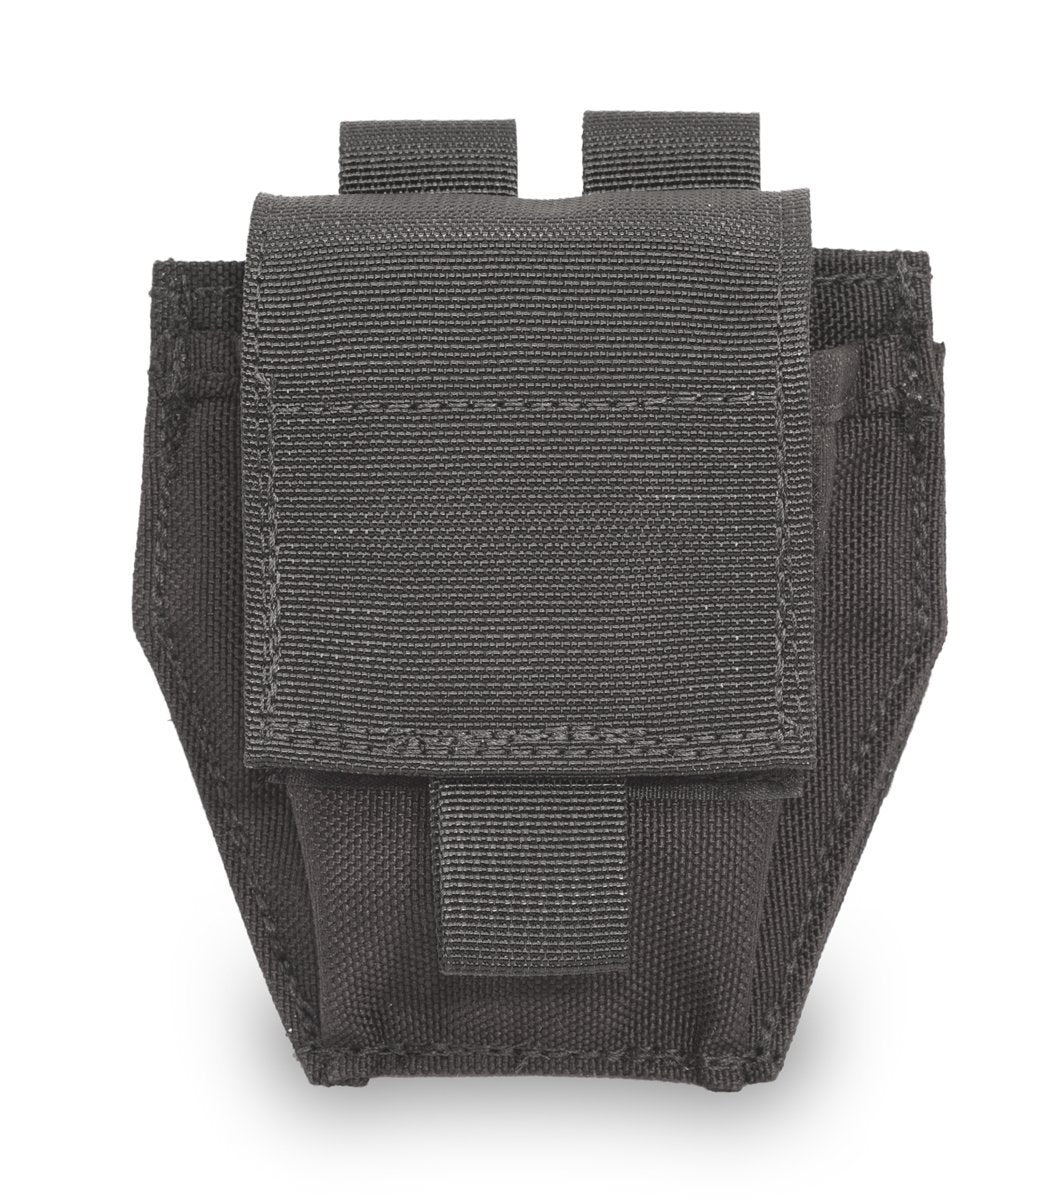 Elite Survival Systems MOLLE Cuff Pouches with velcro fasteners, isolated on a white background.